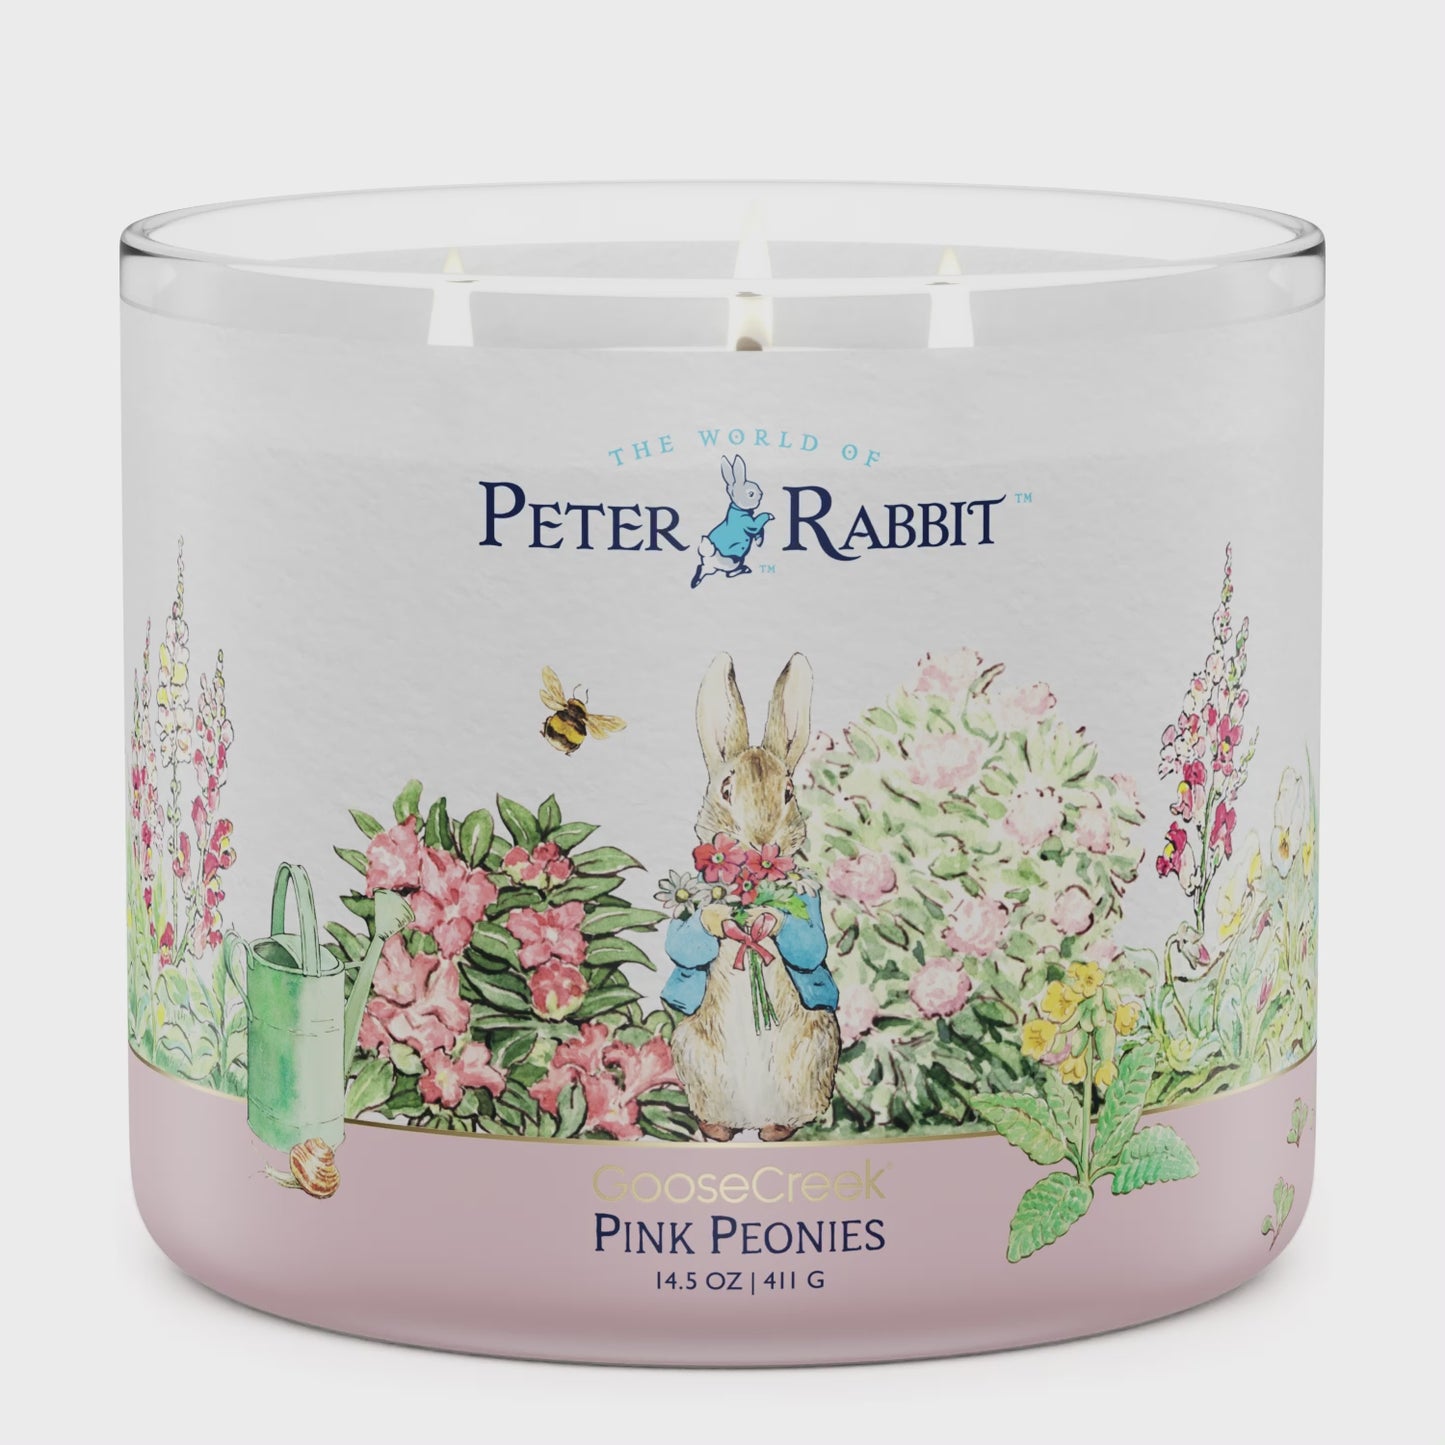 Peter Rabbit Blueberry Jam Large 3-Wick Candle – Goose Creek Candle